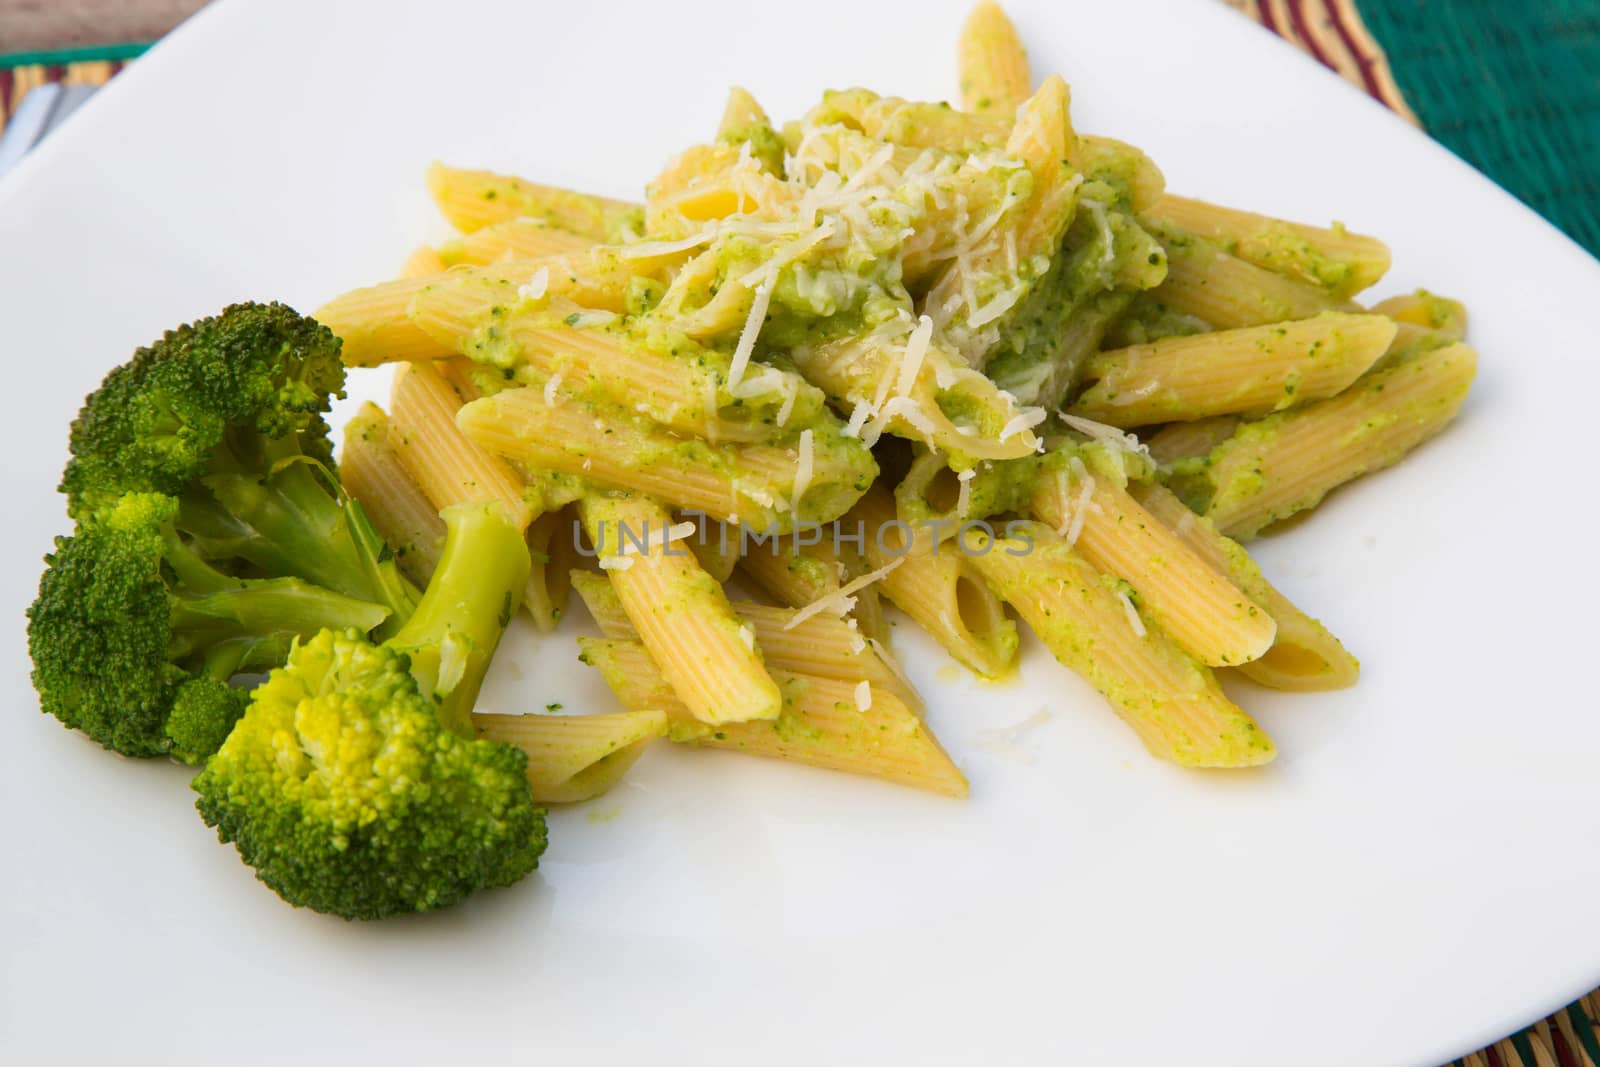 Pasta with broccoli, olive oil and parmesan by tolikoff_photography